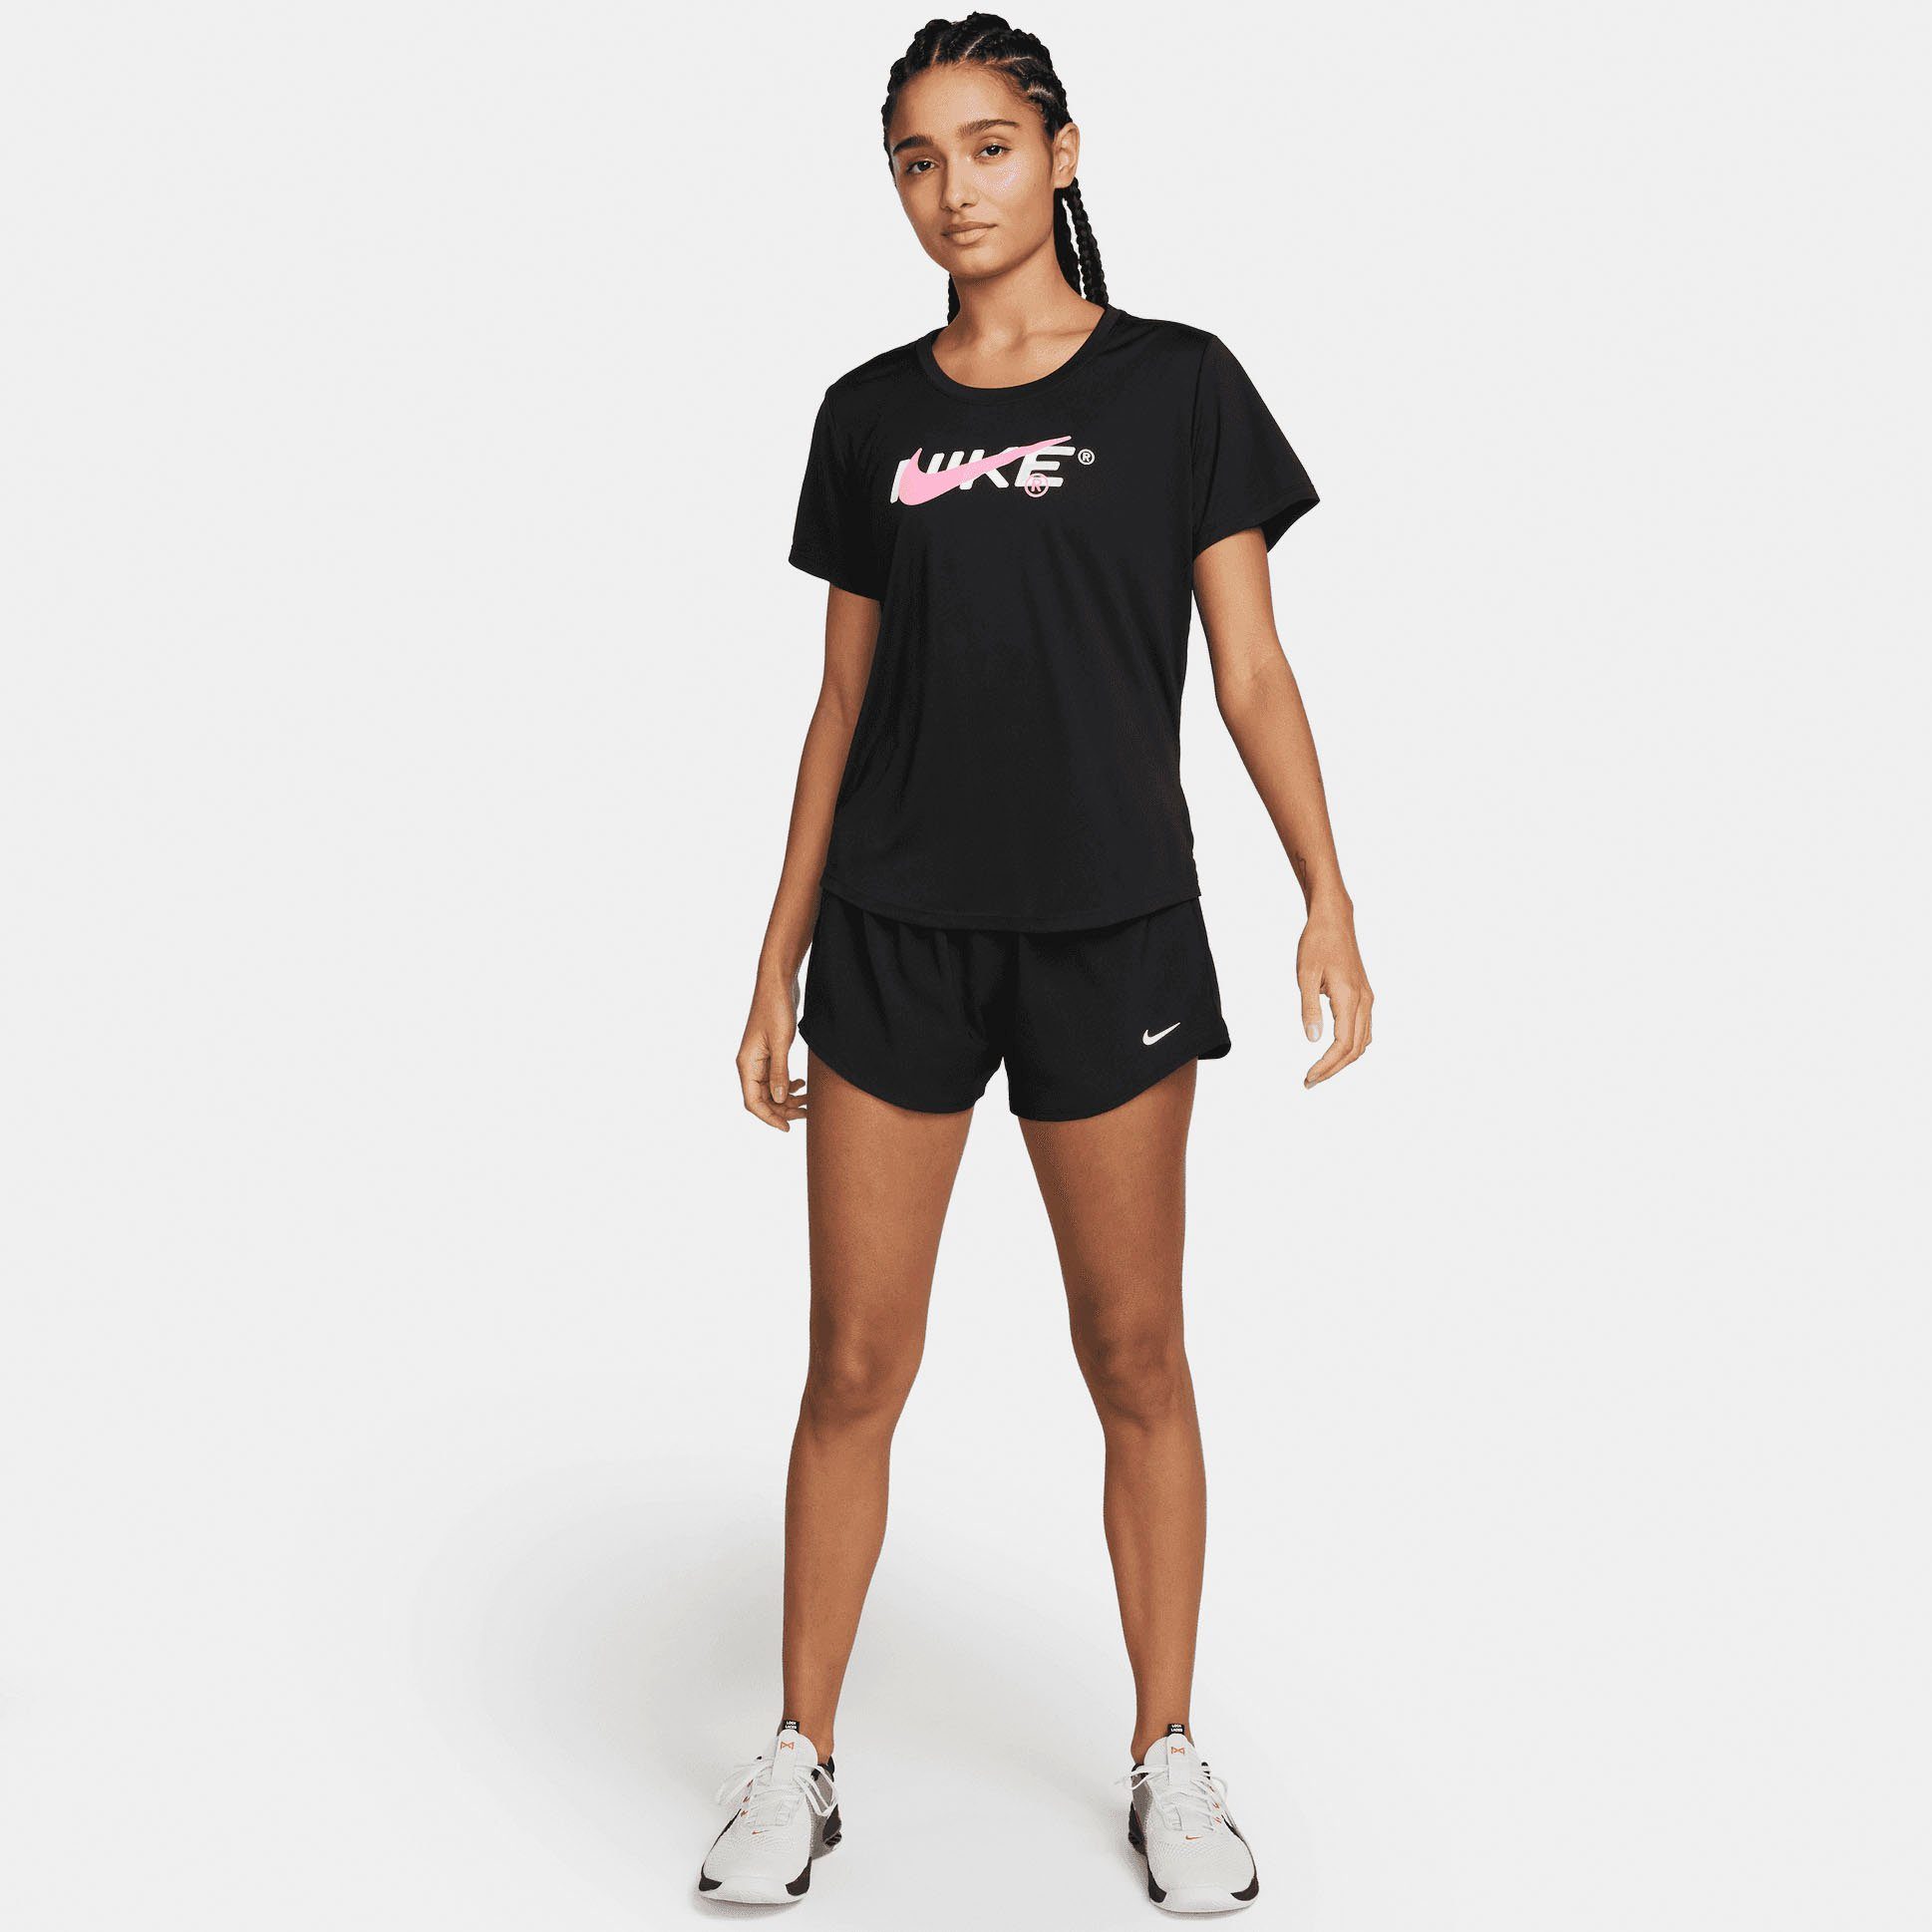 ONE Nike BLACK/REFLECTIVE DRI-FIT BRIEF-LINED SHORTS Trainingsshorts MID-RISE WOMEN'S SILV